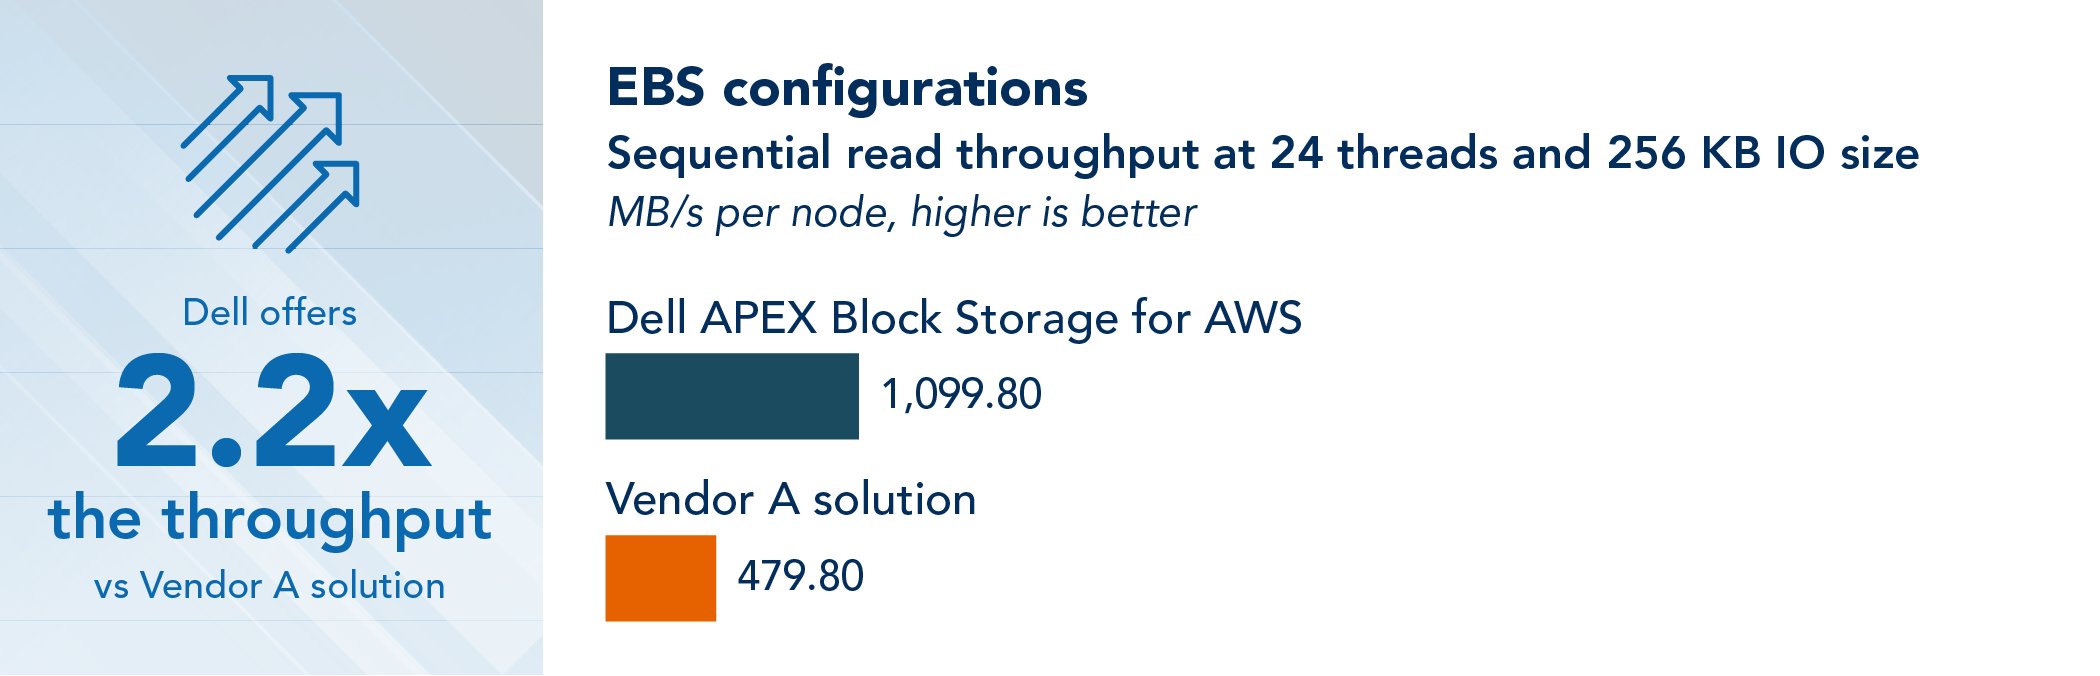 Comparison of sequential read throughput at 24 threads and 256 KB I/O size for Dell APEX Block Storage for AWS and the Vendor A solution in their EBS configurations, where higher is better. Dell APEX Block Storage for AWS achieved 1,099.8  MB/s per node, and the Vendor A solution achieved 479.8 MB/s per node. Dell offers 2.2x the throughput vs. Vendor A solution.